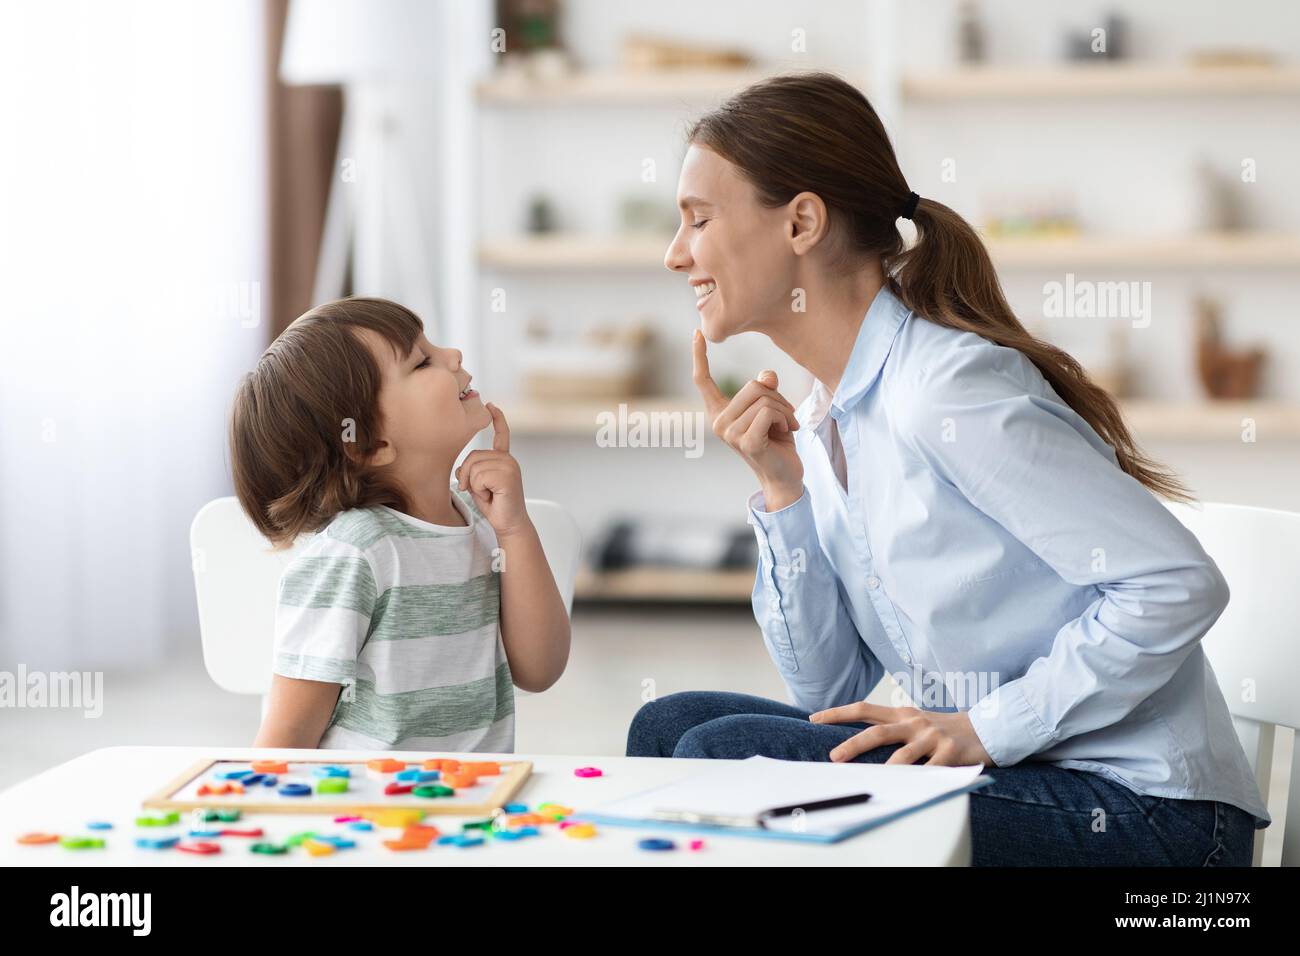 Speech training for kids. Professional woman training with little boy at cabinet, teaching right articulation exercises Stock Photo